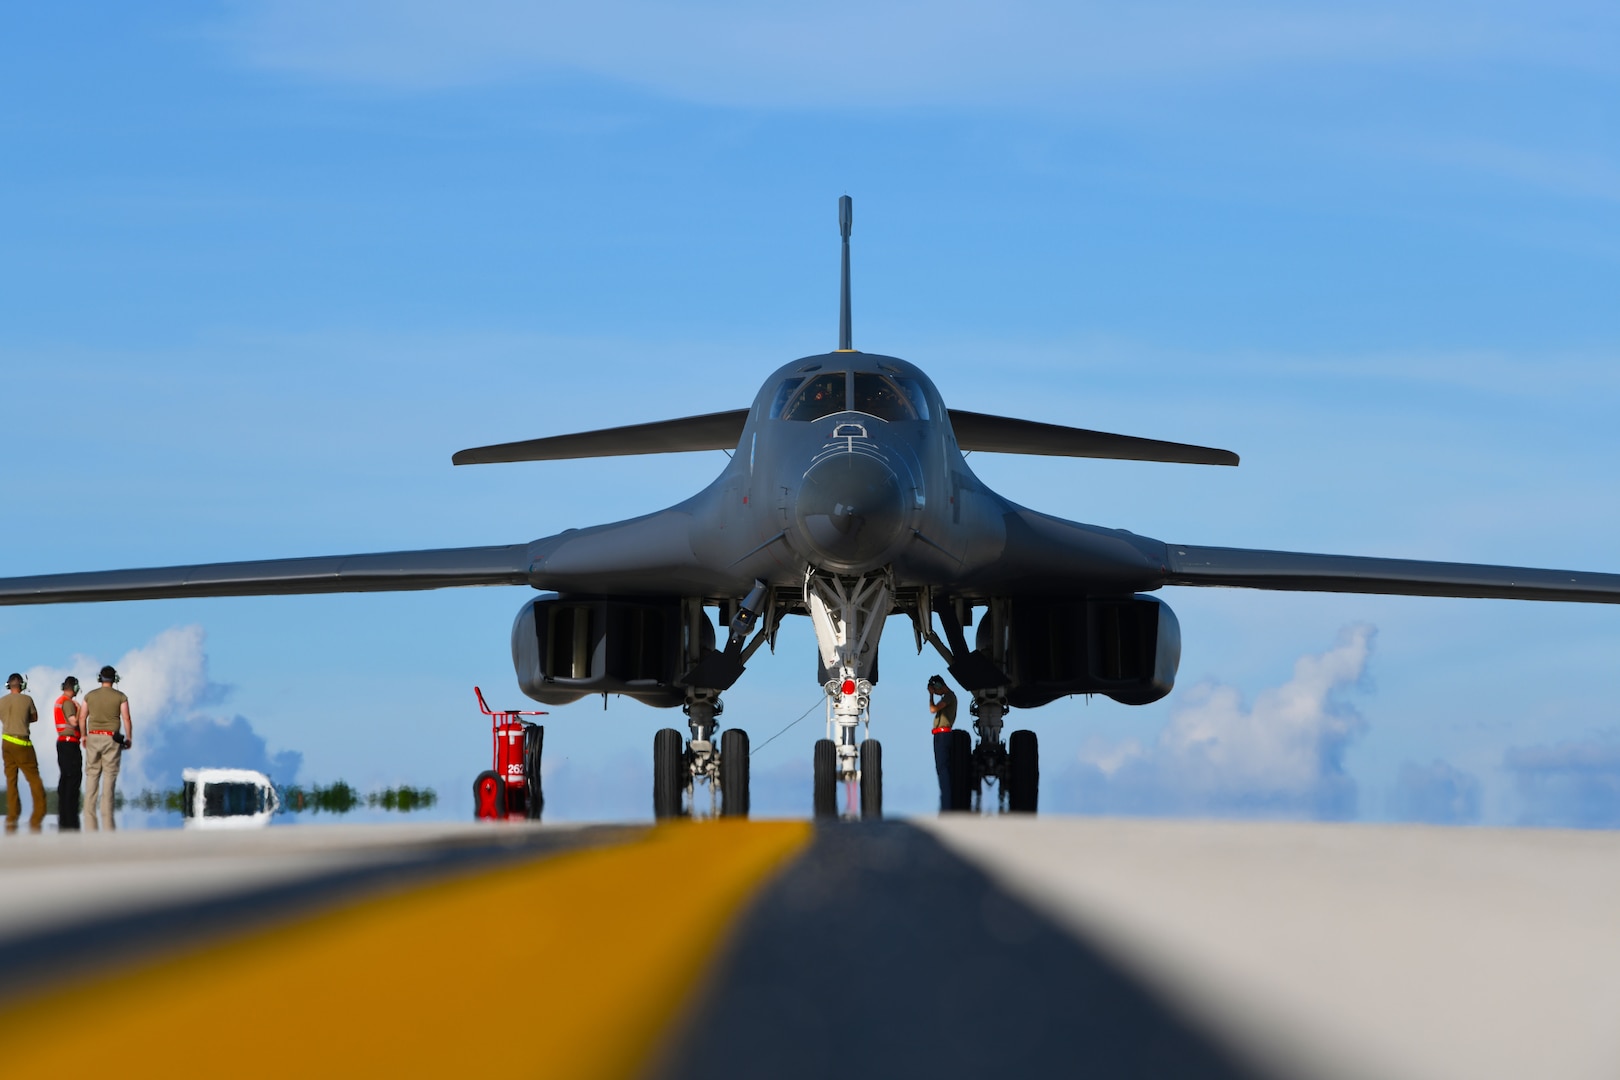 A B-1B Lancer assigned to the 34th Bomb Squadron, Ellsworth Air Force Base, S.D., taxis at Andersen AFB, Guam, after arriving for a Bomber Task Force deployment, Sept. 10, 2020. Approximately 200 Airmen and four B-1s assigned to the 28th Bomb Wing at Ellsworth AFB, South Dakota, deployed to the Pacific in support of the Bomber Task Force employment model. The BTF is deployed to Andersen AFB to support Pacific Air Forces’ training efforts with allies, partners and joint forces; and strategic deterrence missions to reinforce the rules-based order in the Indo-Pacific region.